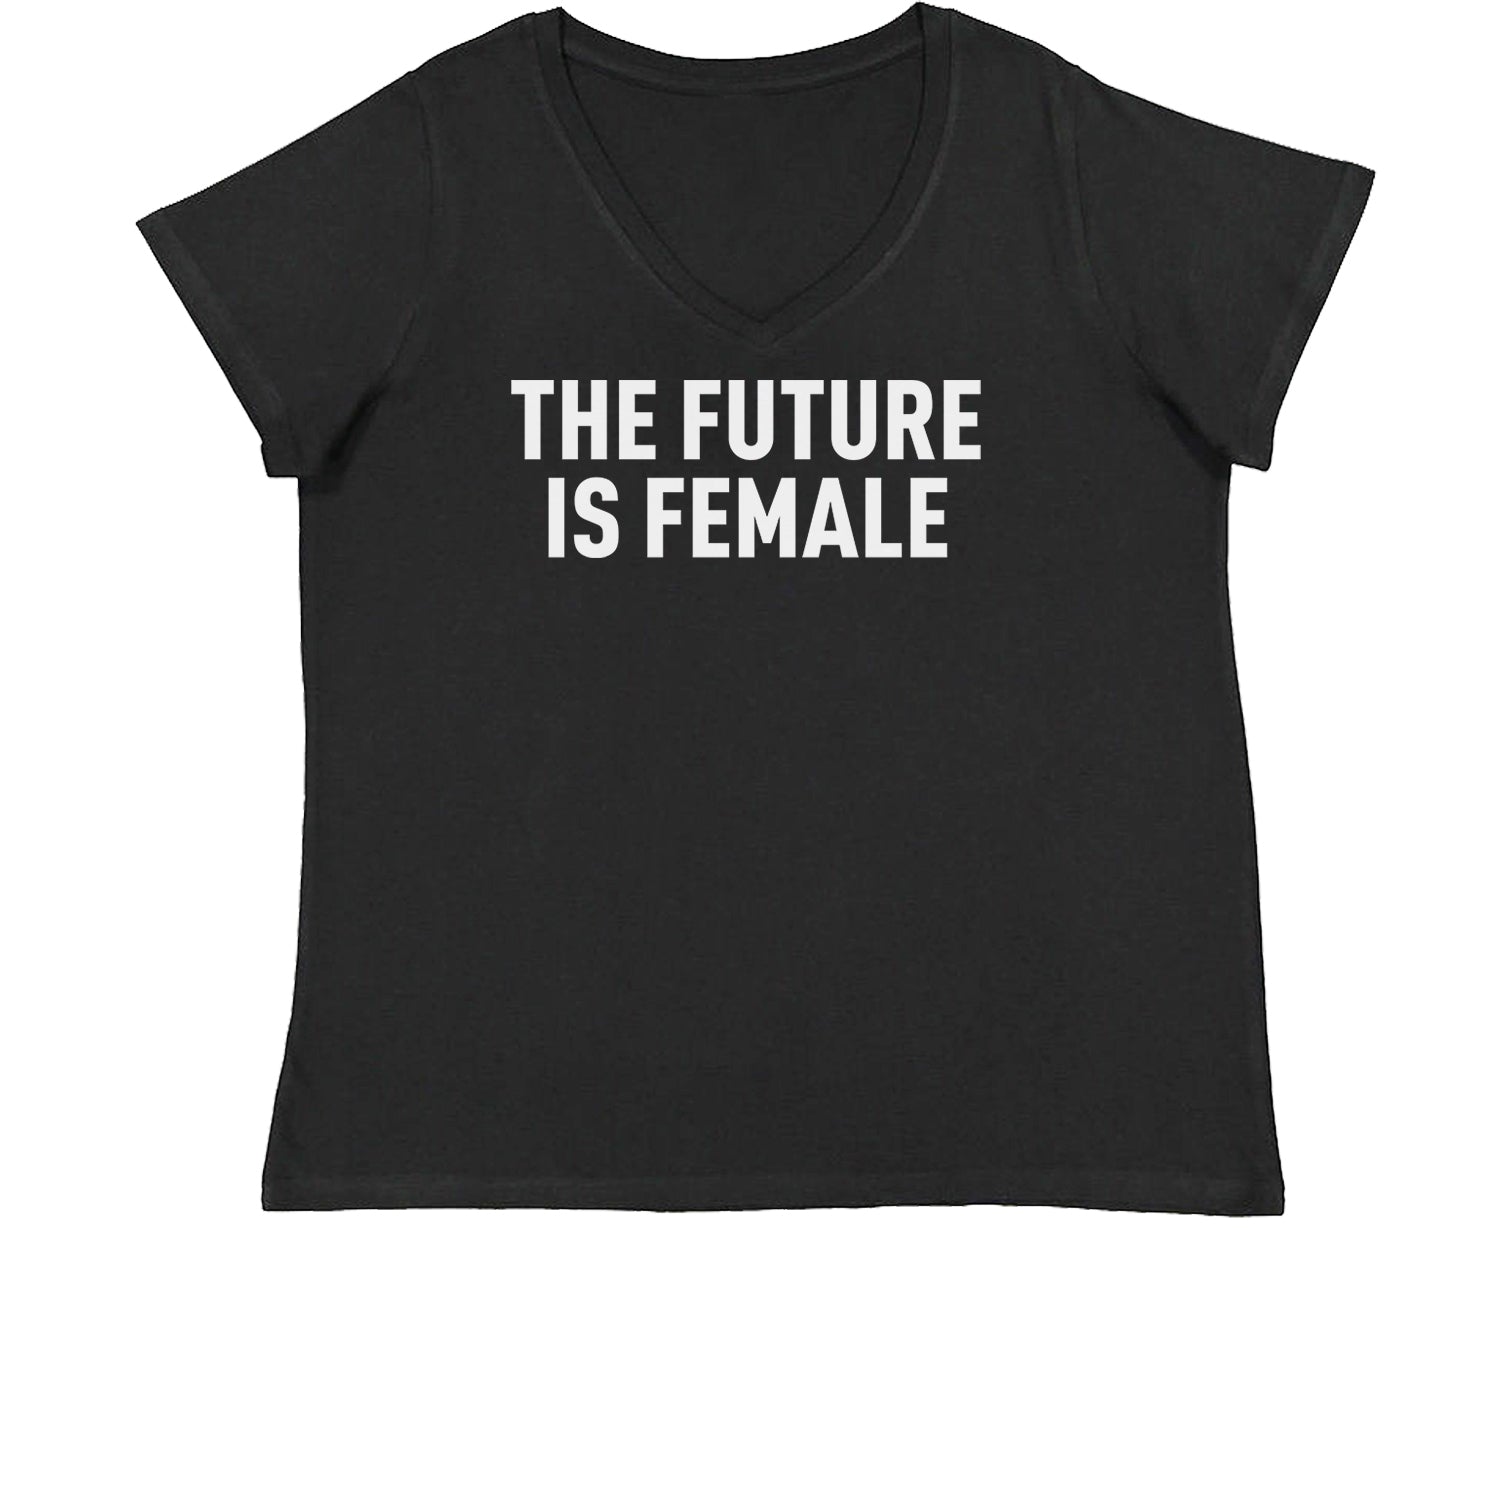 The Future Is Female Feminism Womens Plus Size V-Neck T-shirt female, feminism, feminist, femme, future, is, liberation, suffrage, the by Expression Tees